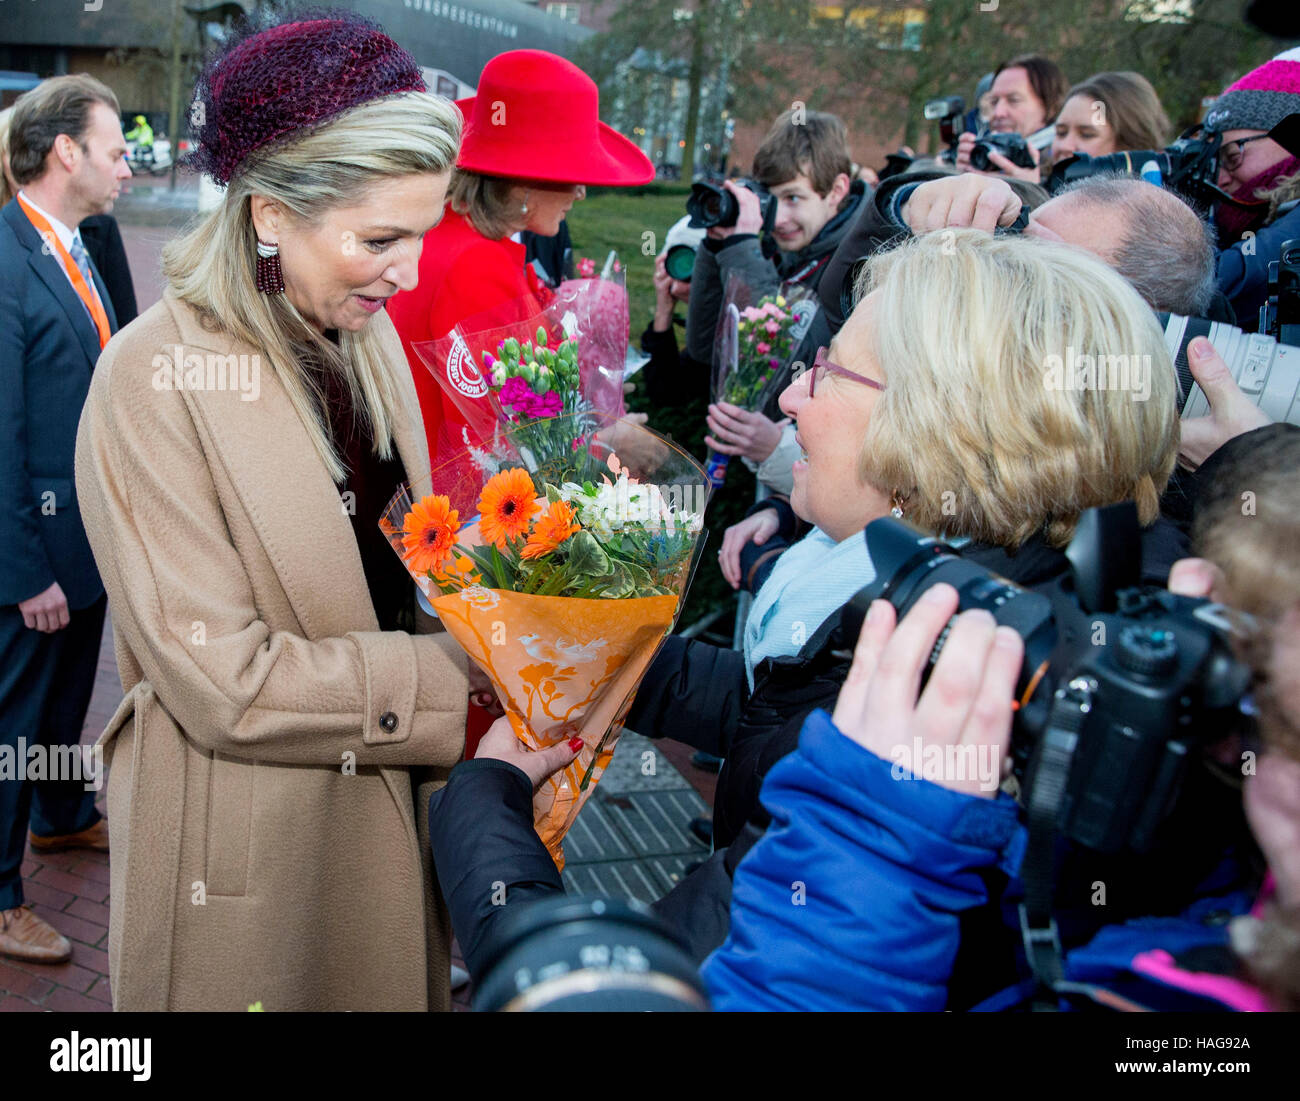 Amstelveen, The Netherlands. 29th Nov, 2016. Queen Maxima and Queen Mathilde visit the exhibition Pierre Alechinsky Post Cobra at the Cobra Museum in Amstelveen, The Netherlands, 29 November 2016. The King and Queen of Belgium bring a 3 day state visit to the Netherlands. Photo: Patrick van Katwijk - NO WIRE SERVICE - Photo: Patrick van Katwijk/Dutch Photo Press/dpa/Alamy Live News Stock Photo